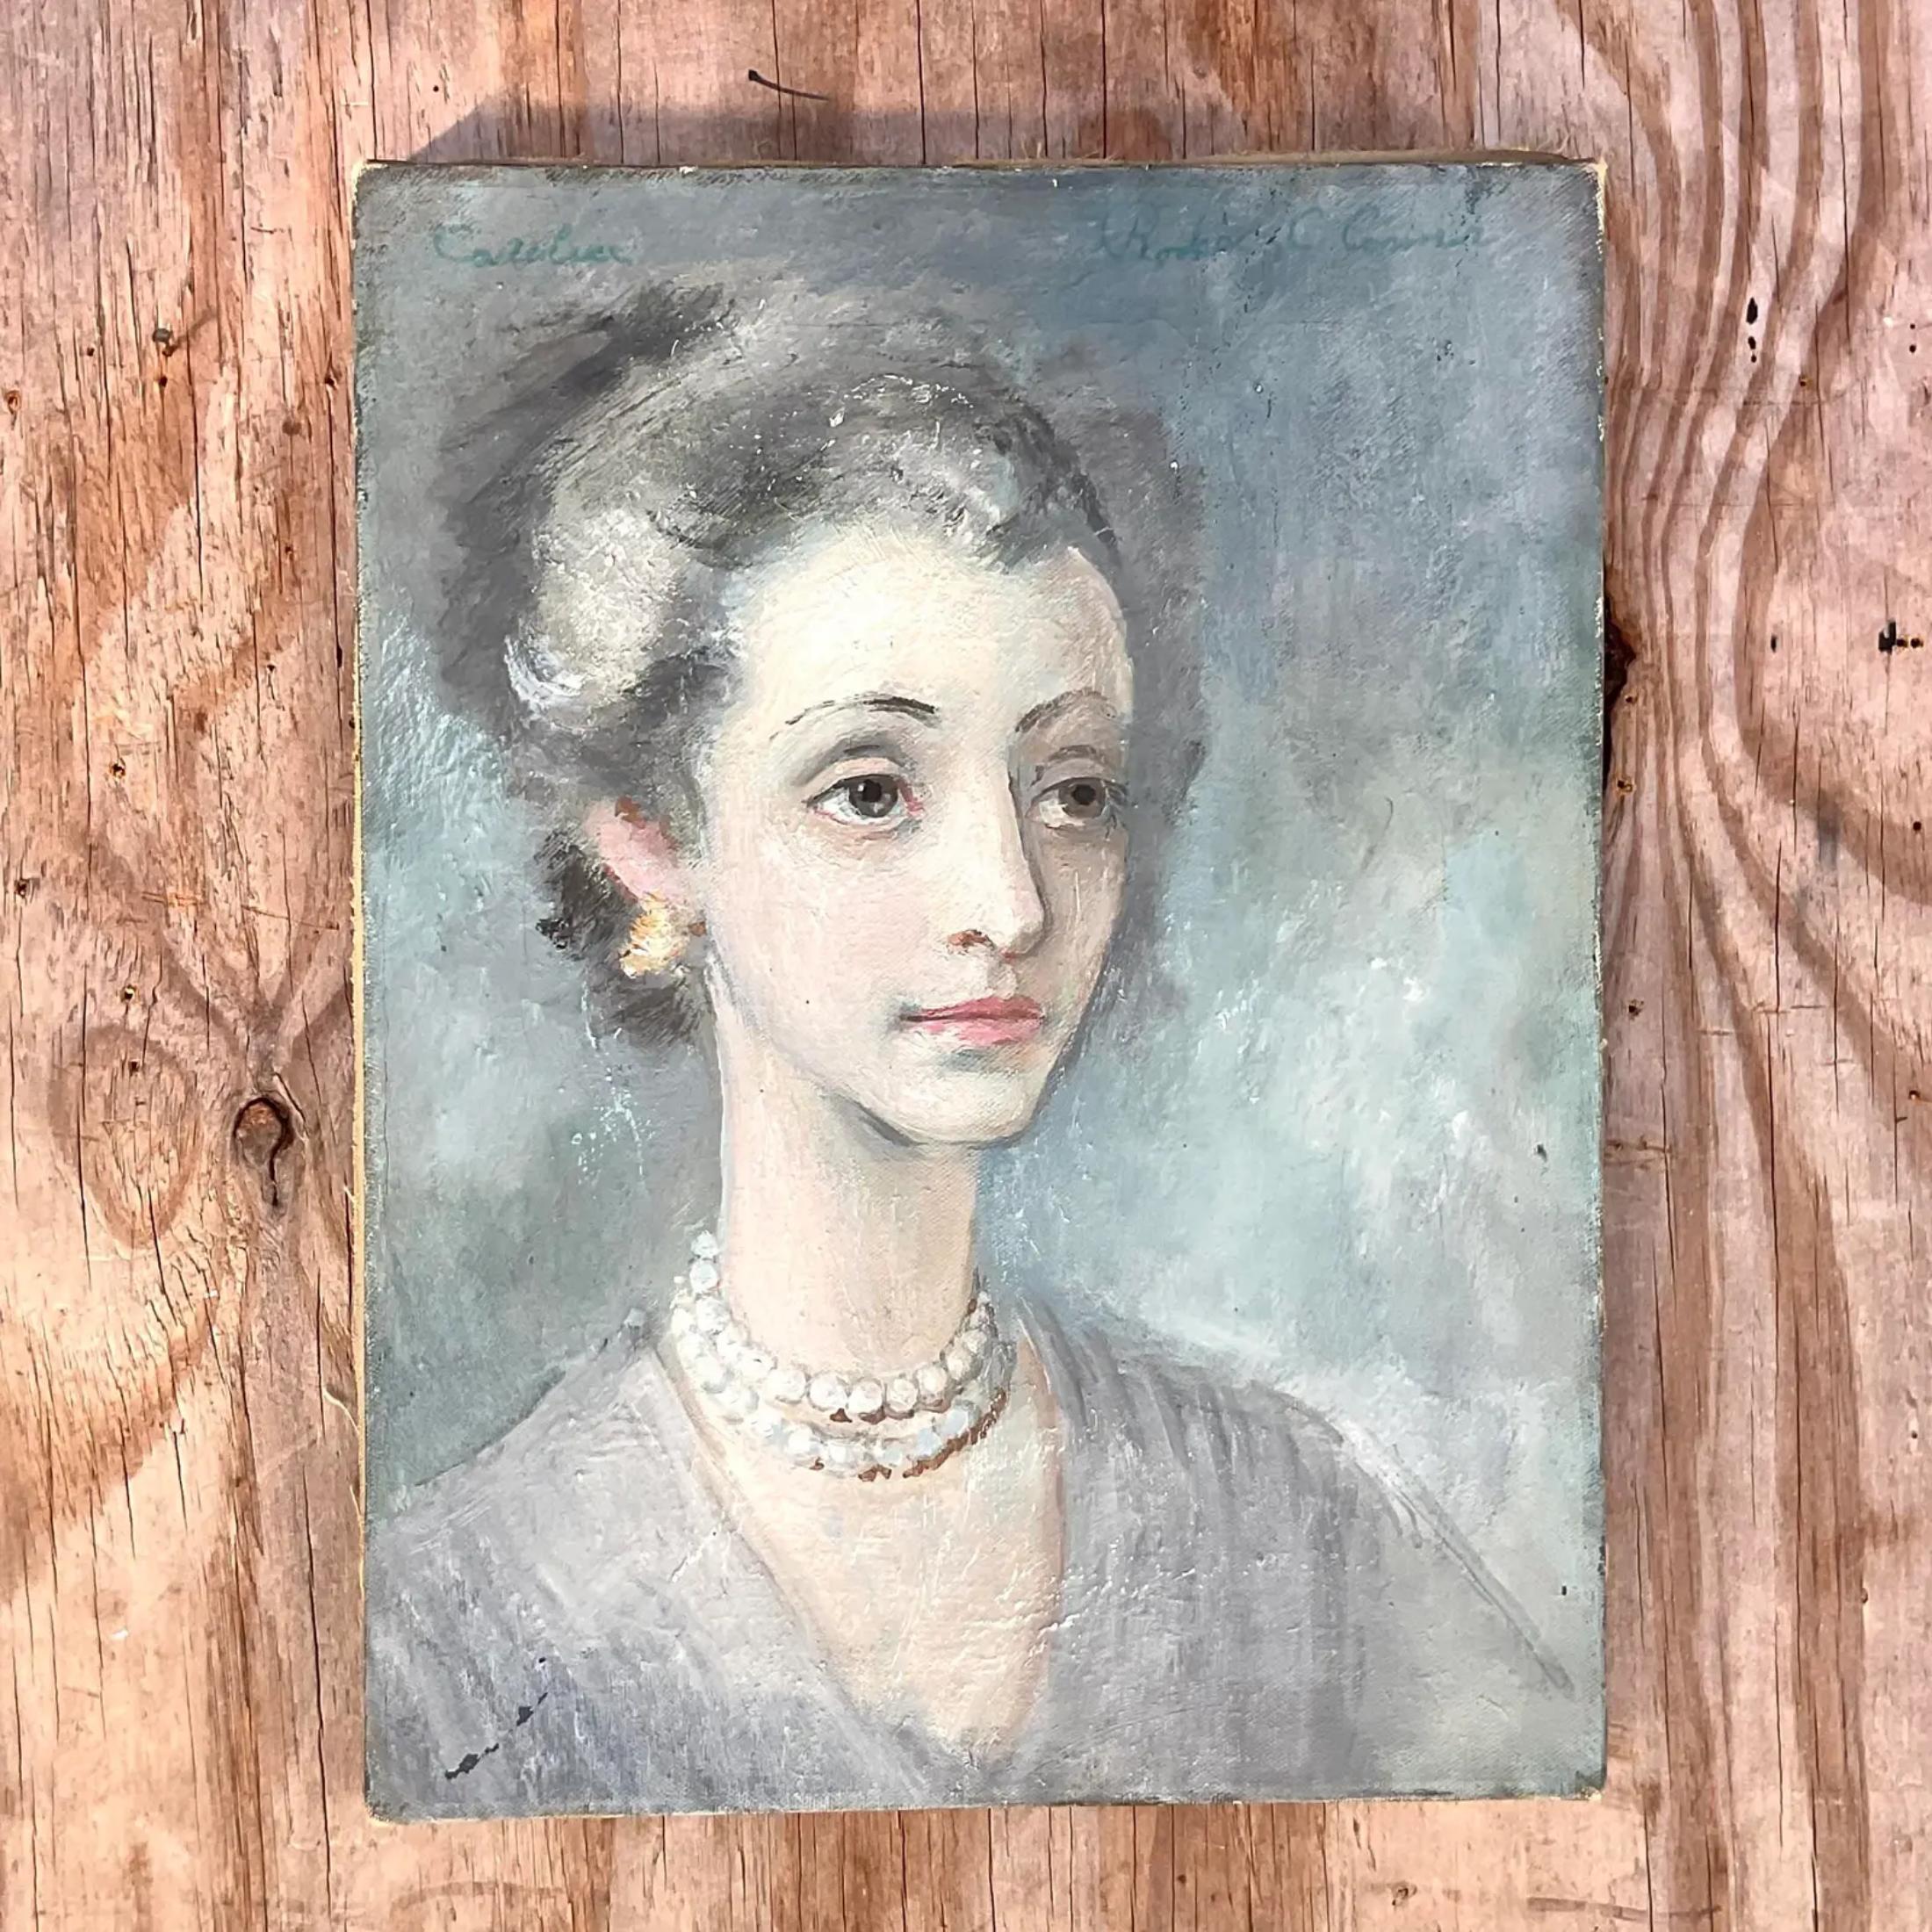 A fantastic vintage Boho original oil painting on canvas. A chic portrait of a fine lady in cool grey tones. Signed by the artist. Acquired from a Miami estate